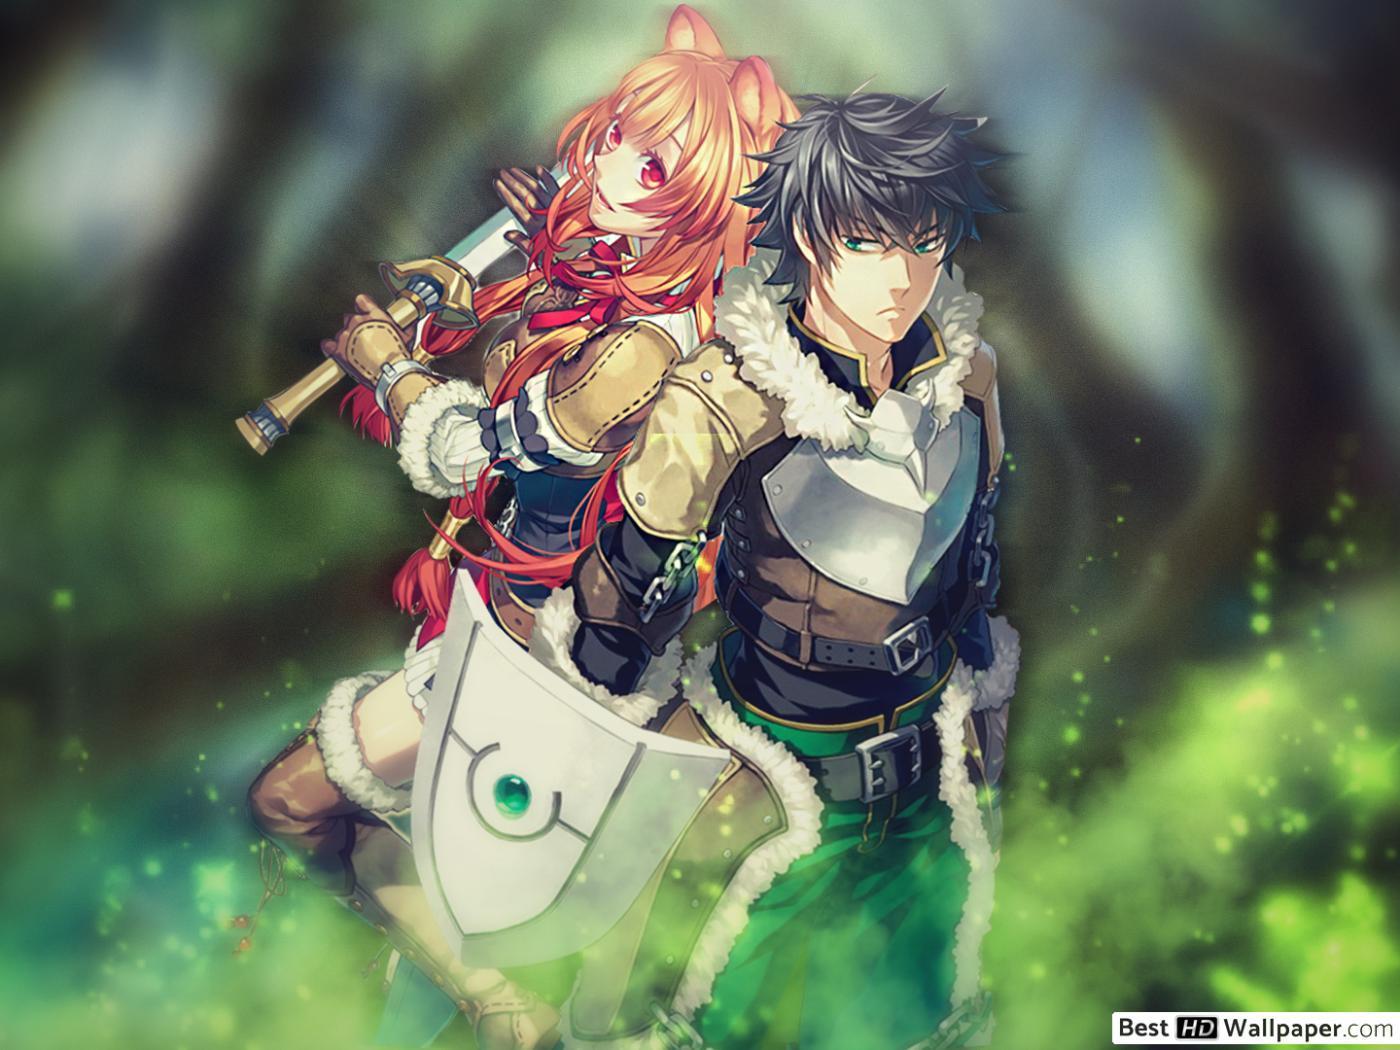 The Rising Of The Shield Hero Wallpaper For Ipad